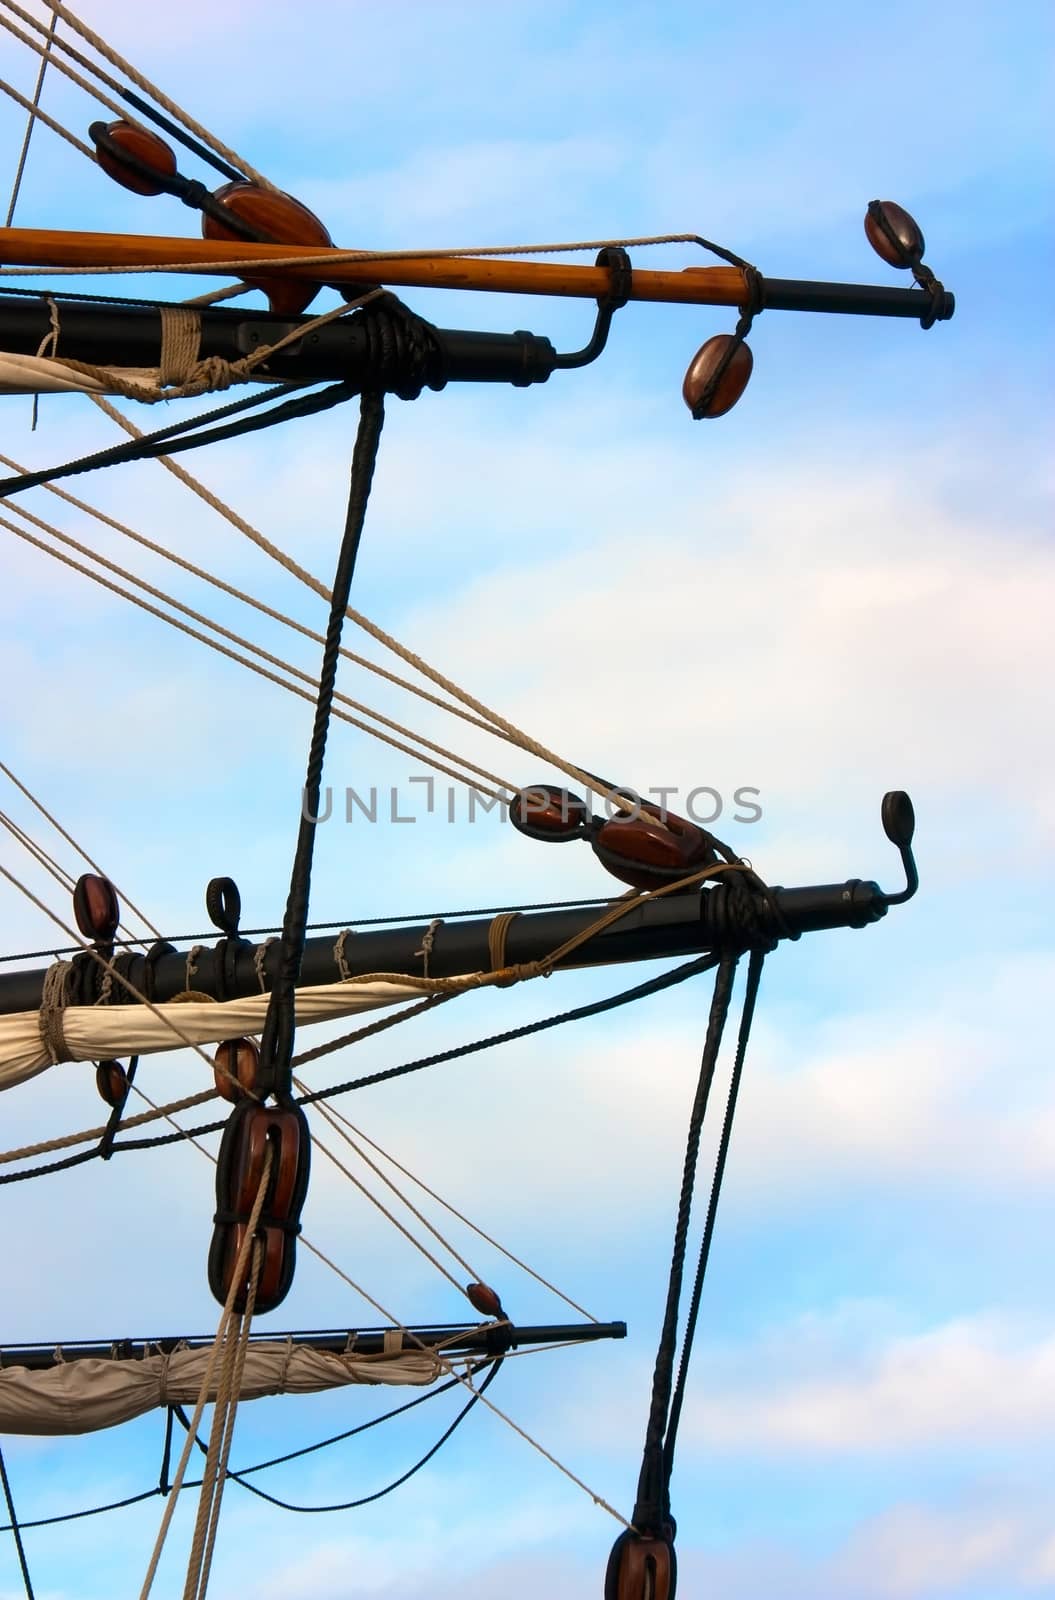 Spars and pulley blocks of an old sailing ship against sky background